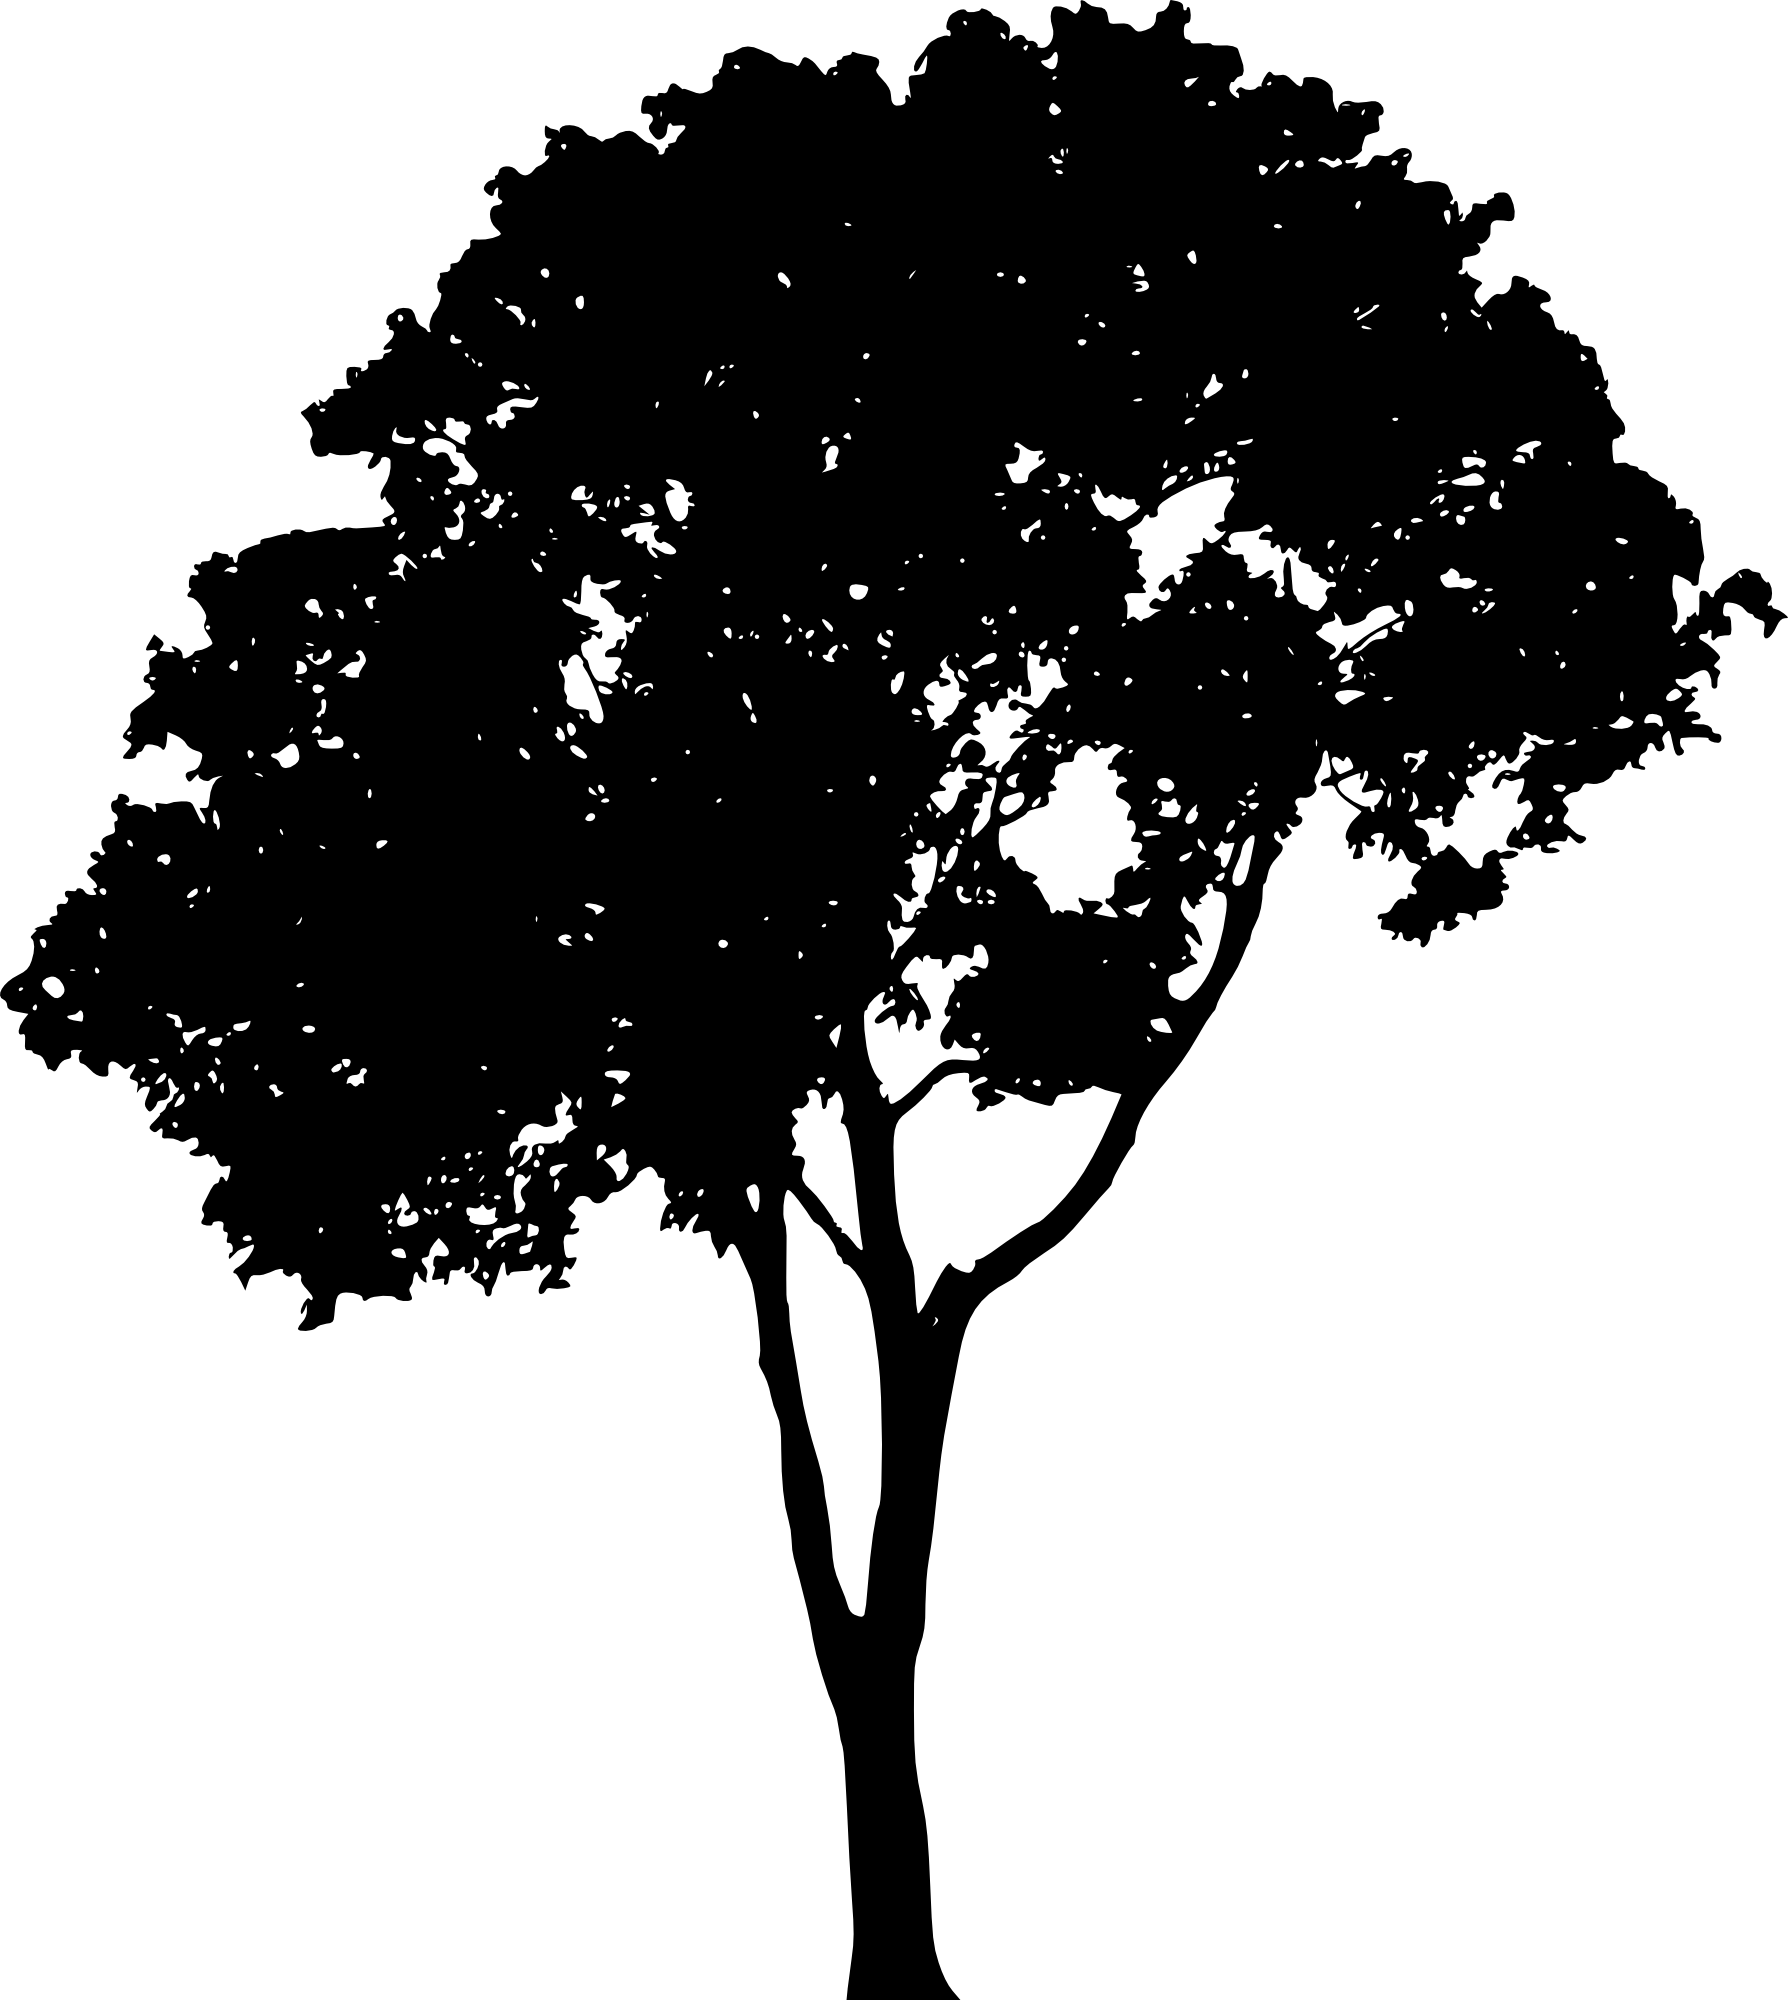 Tree Outline Logo - Tree Outline Vector at GetDrawings.com | Free for personal use Tree ...